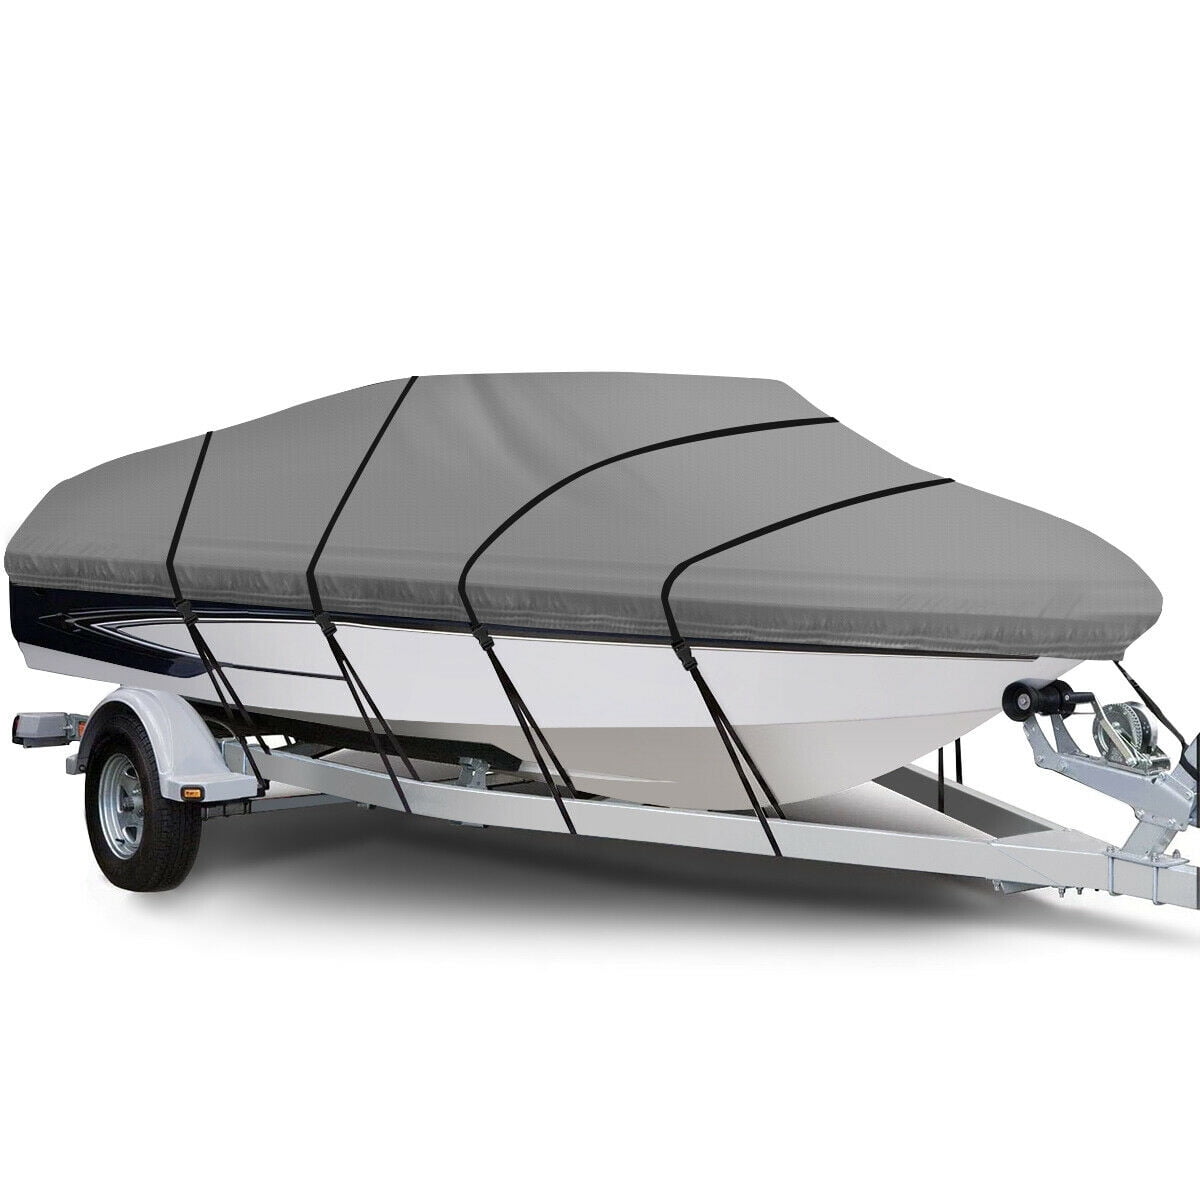 StormPro 22 Boat Cover'-24' L x 116" W Charcoal Polyester V-Hull Runabout O/B & 